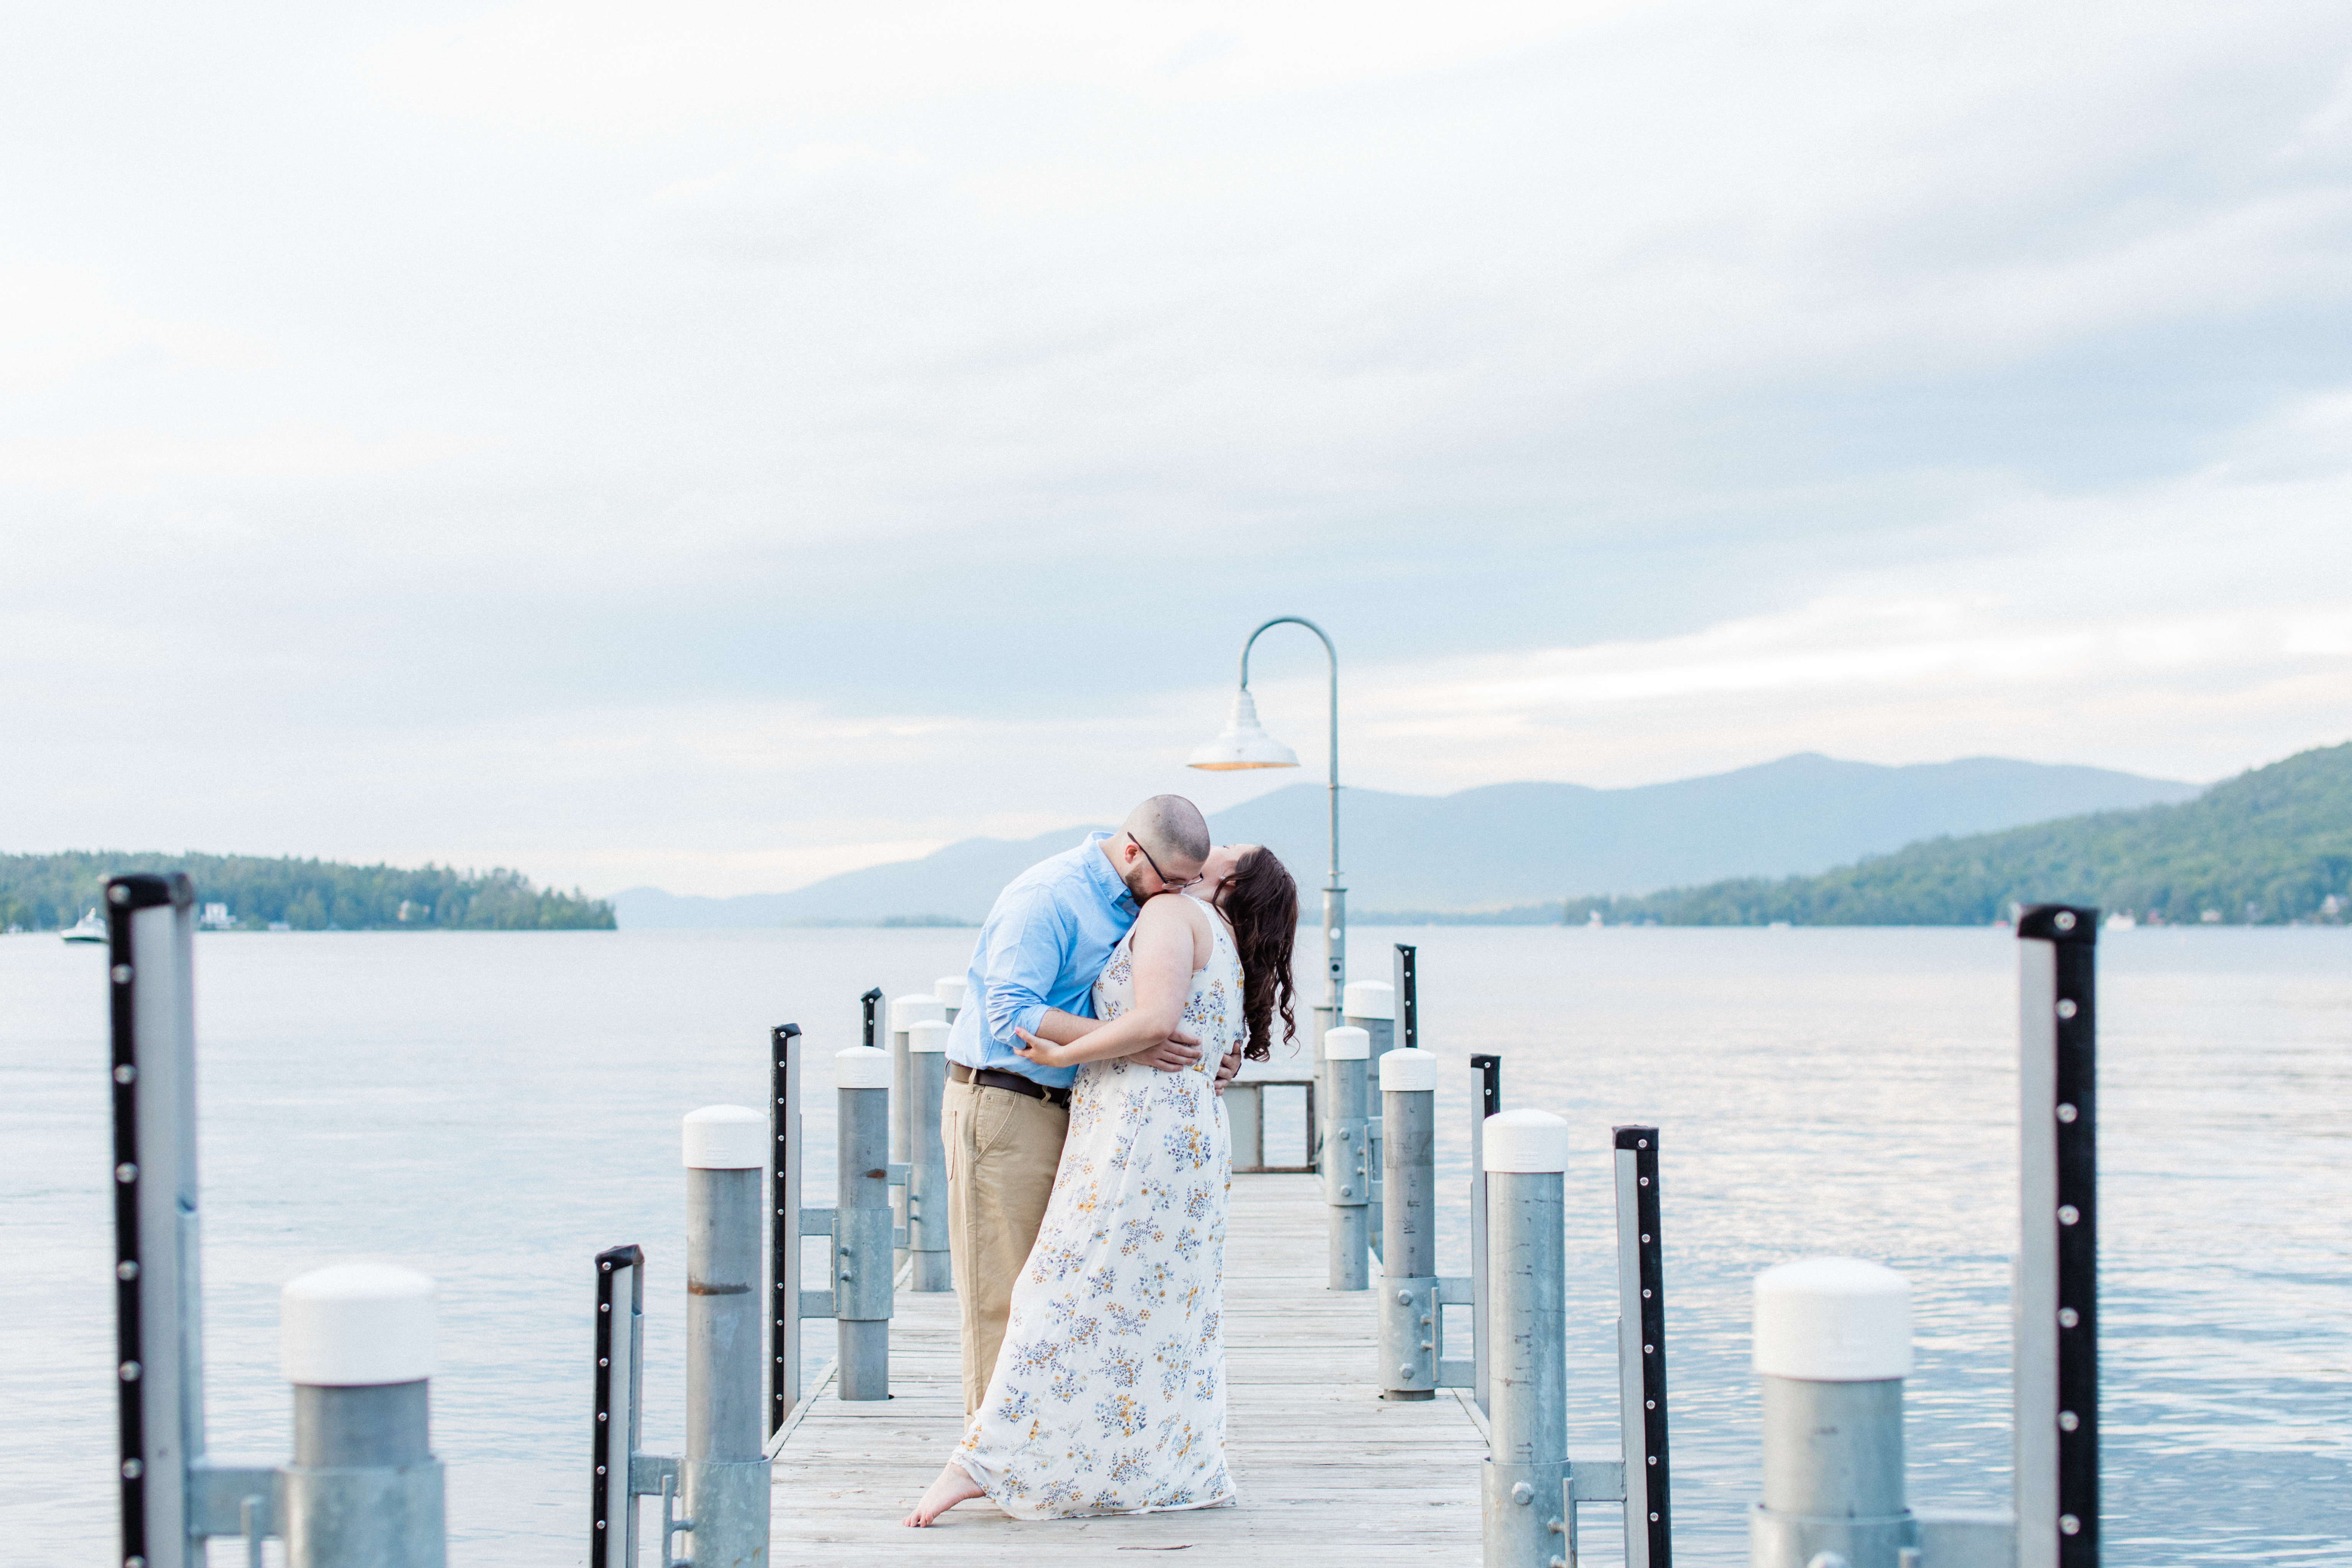 Engaged couple kissing on the dock in Lake George, New York